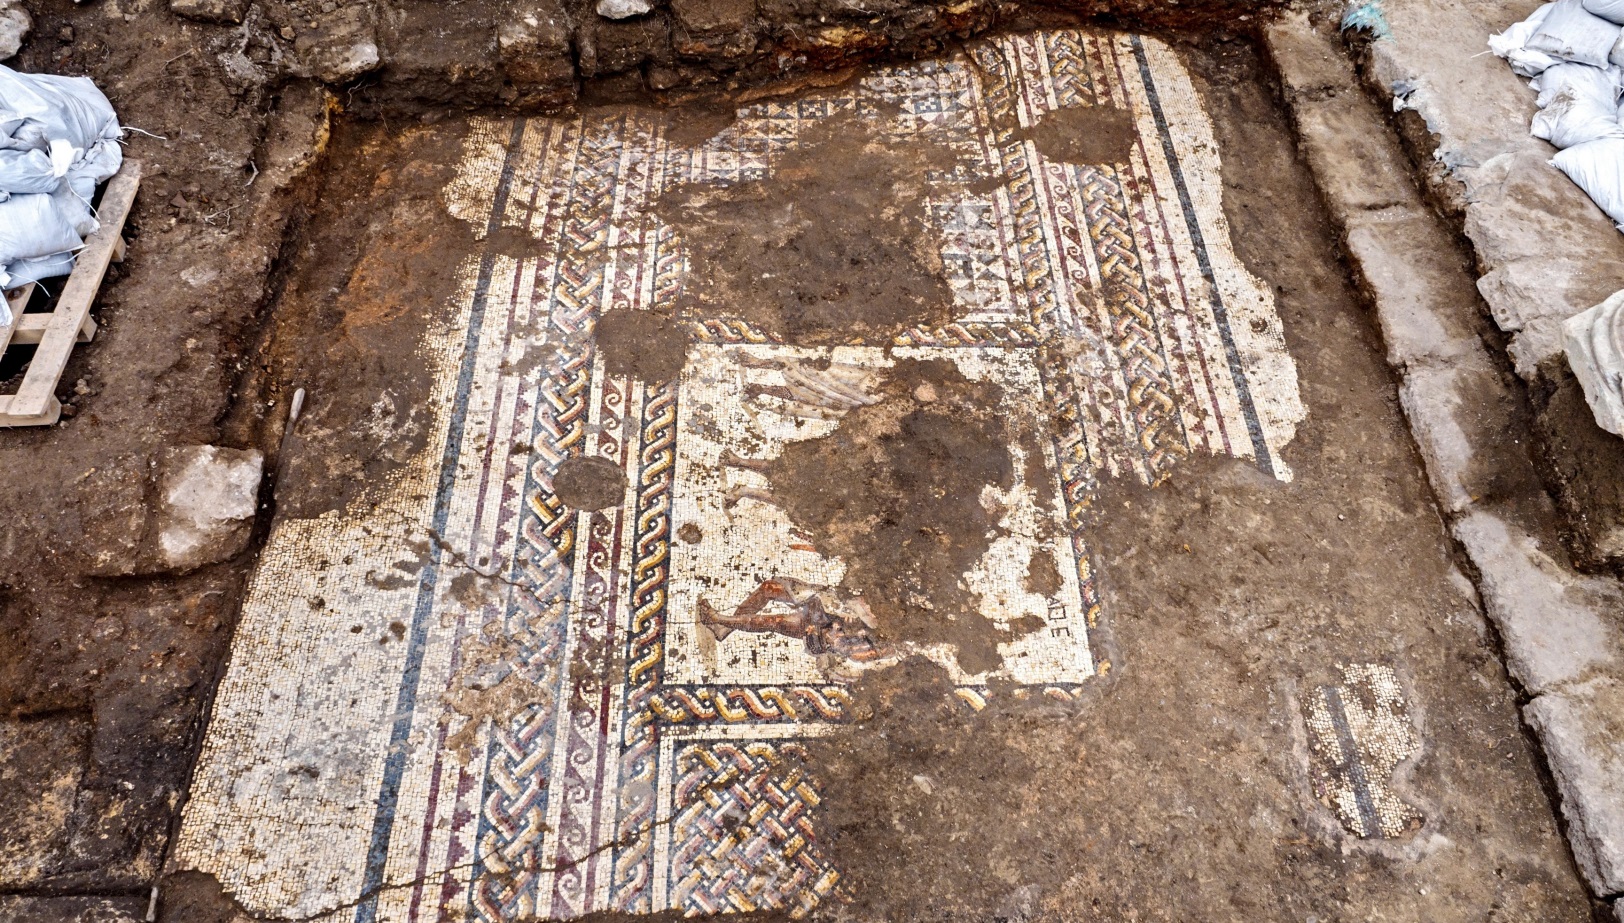 The mosaic uncovered in Caesarea. Photo by Assaf Peretz/Israel Antiquities Authority